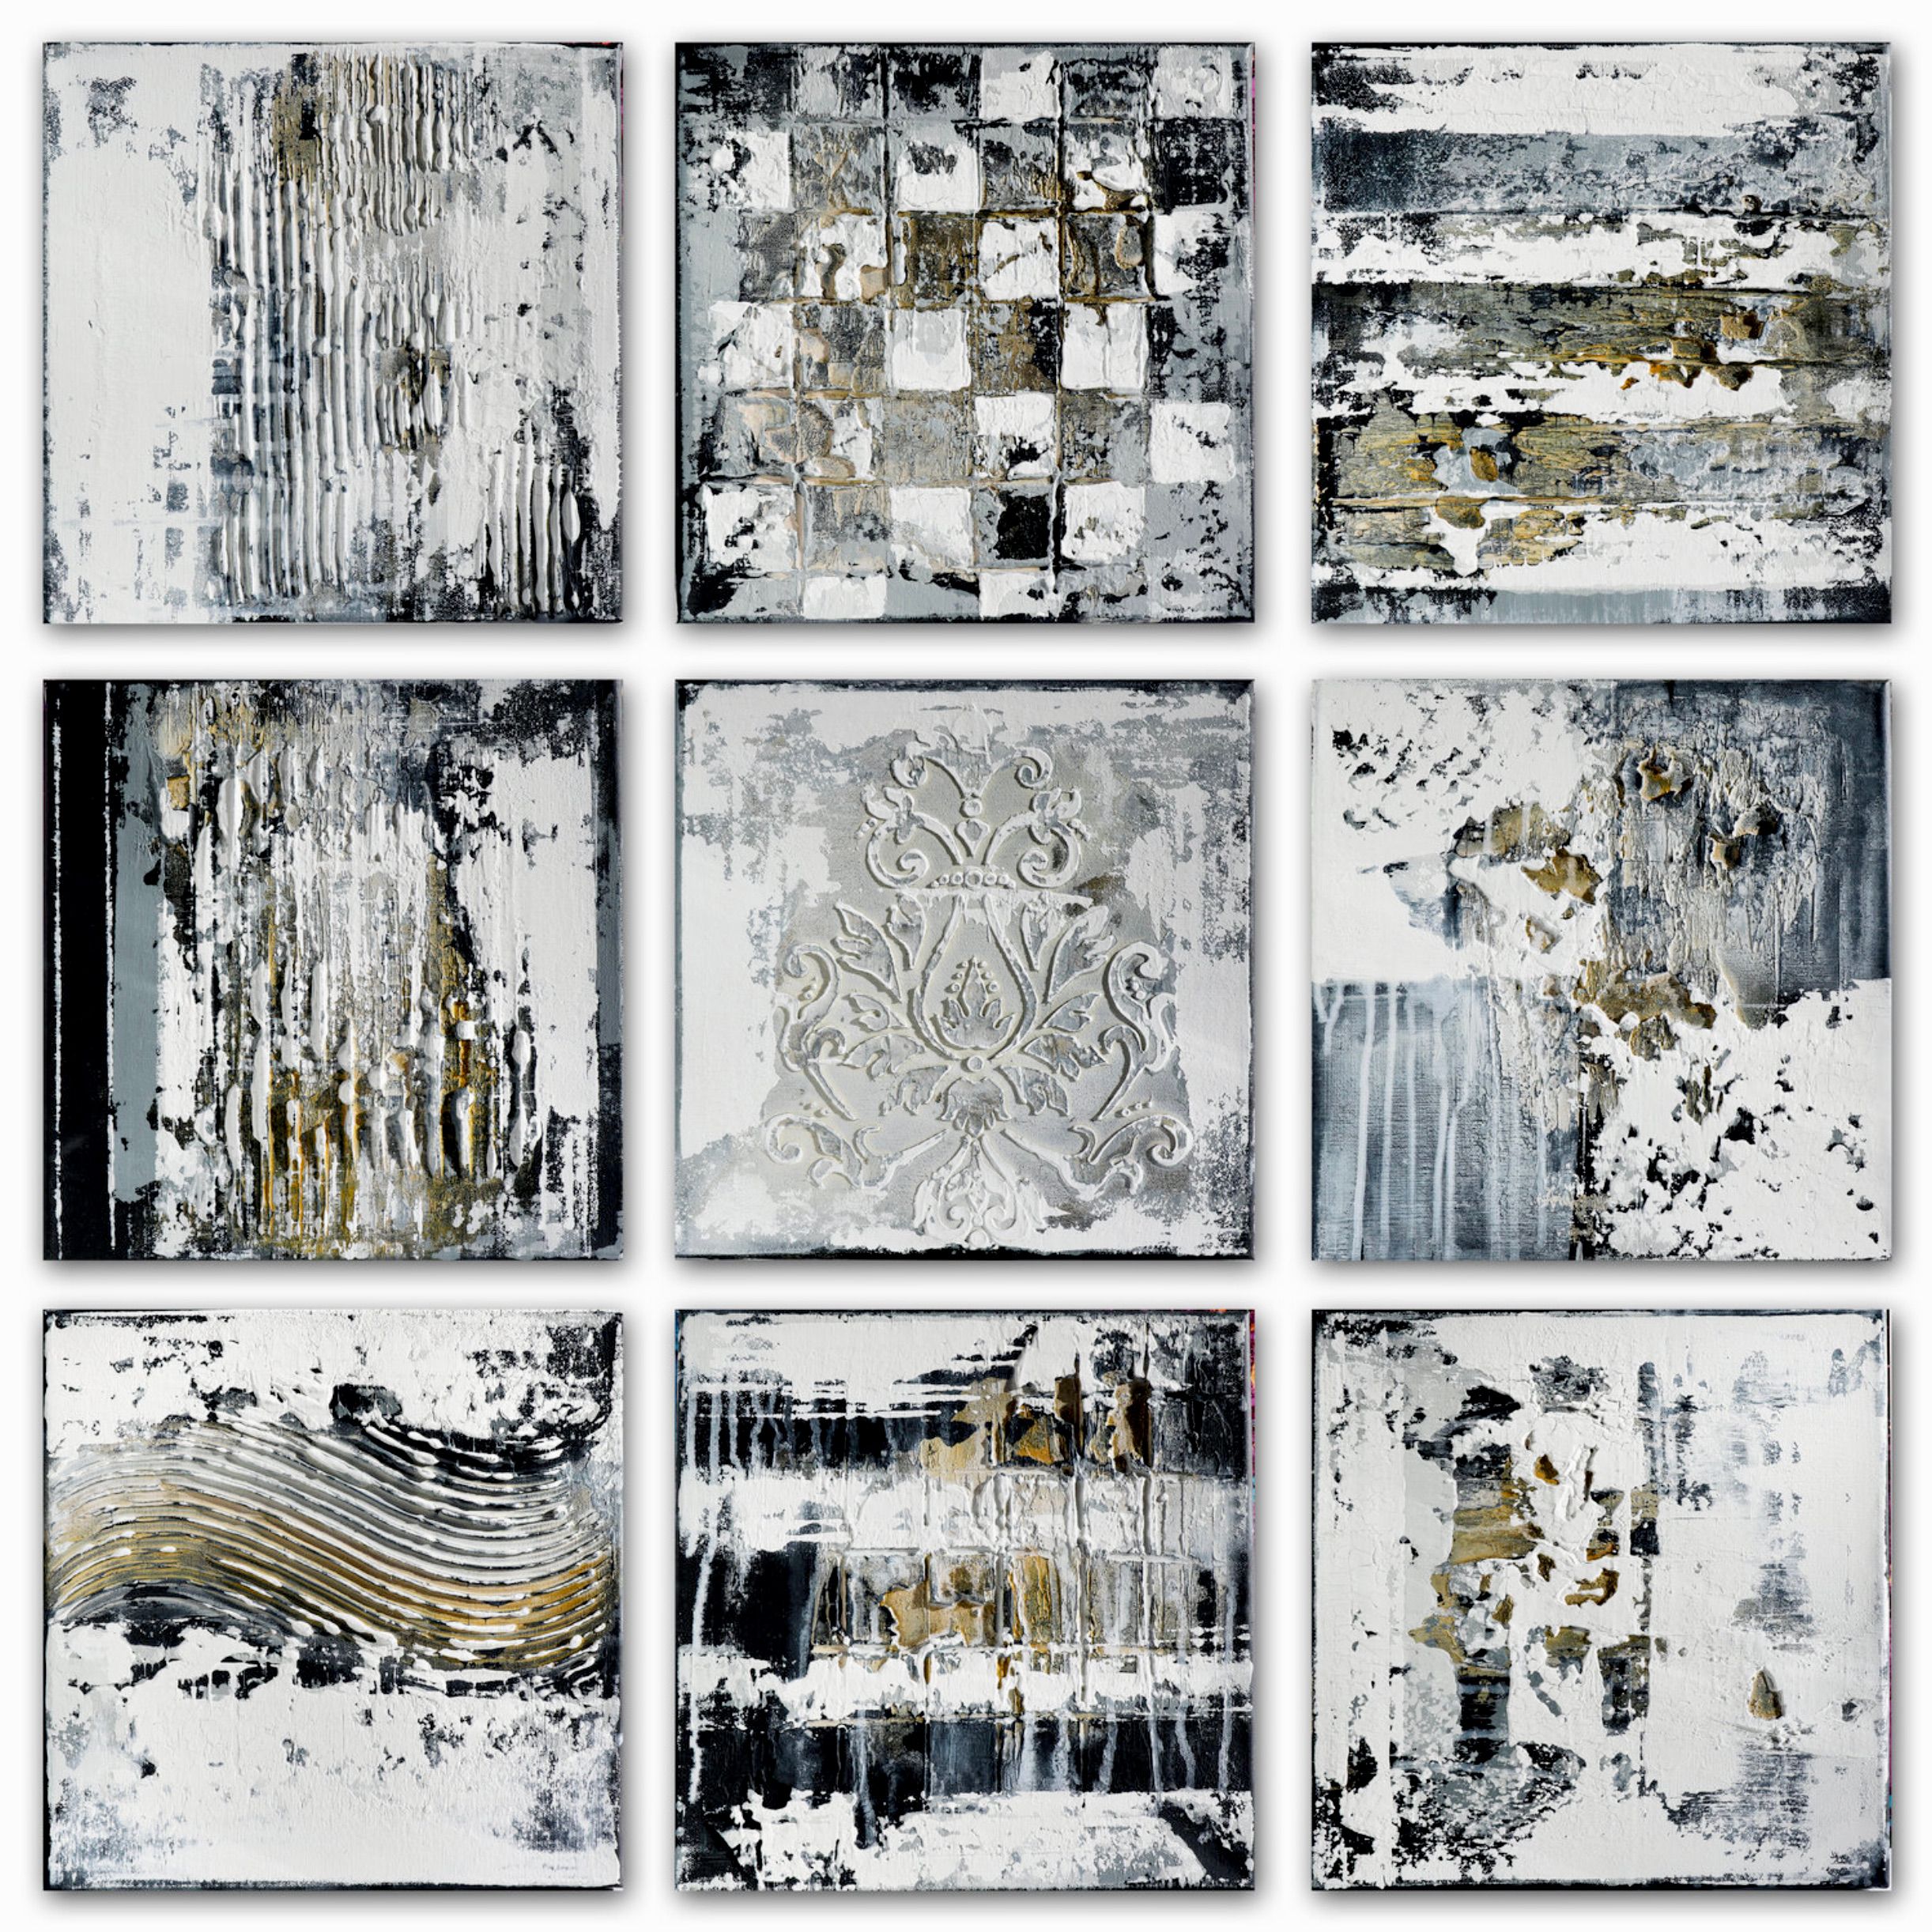 In Inez Froehlich's "ARTEFACTS II" expressionist, abstract, painting consists of 9 parts á 30 x 30 cm. Natural colours, pastel shades, black, white, grey and gold dominate.